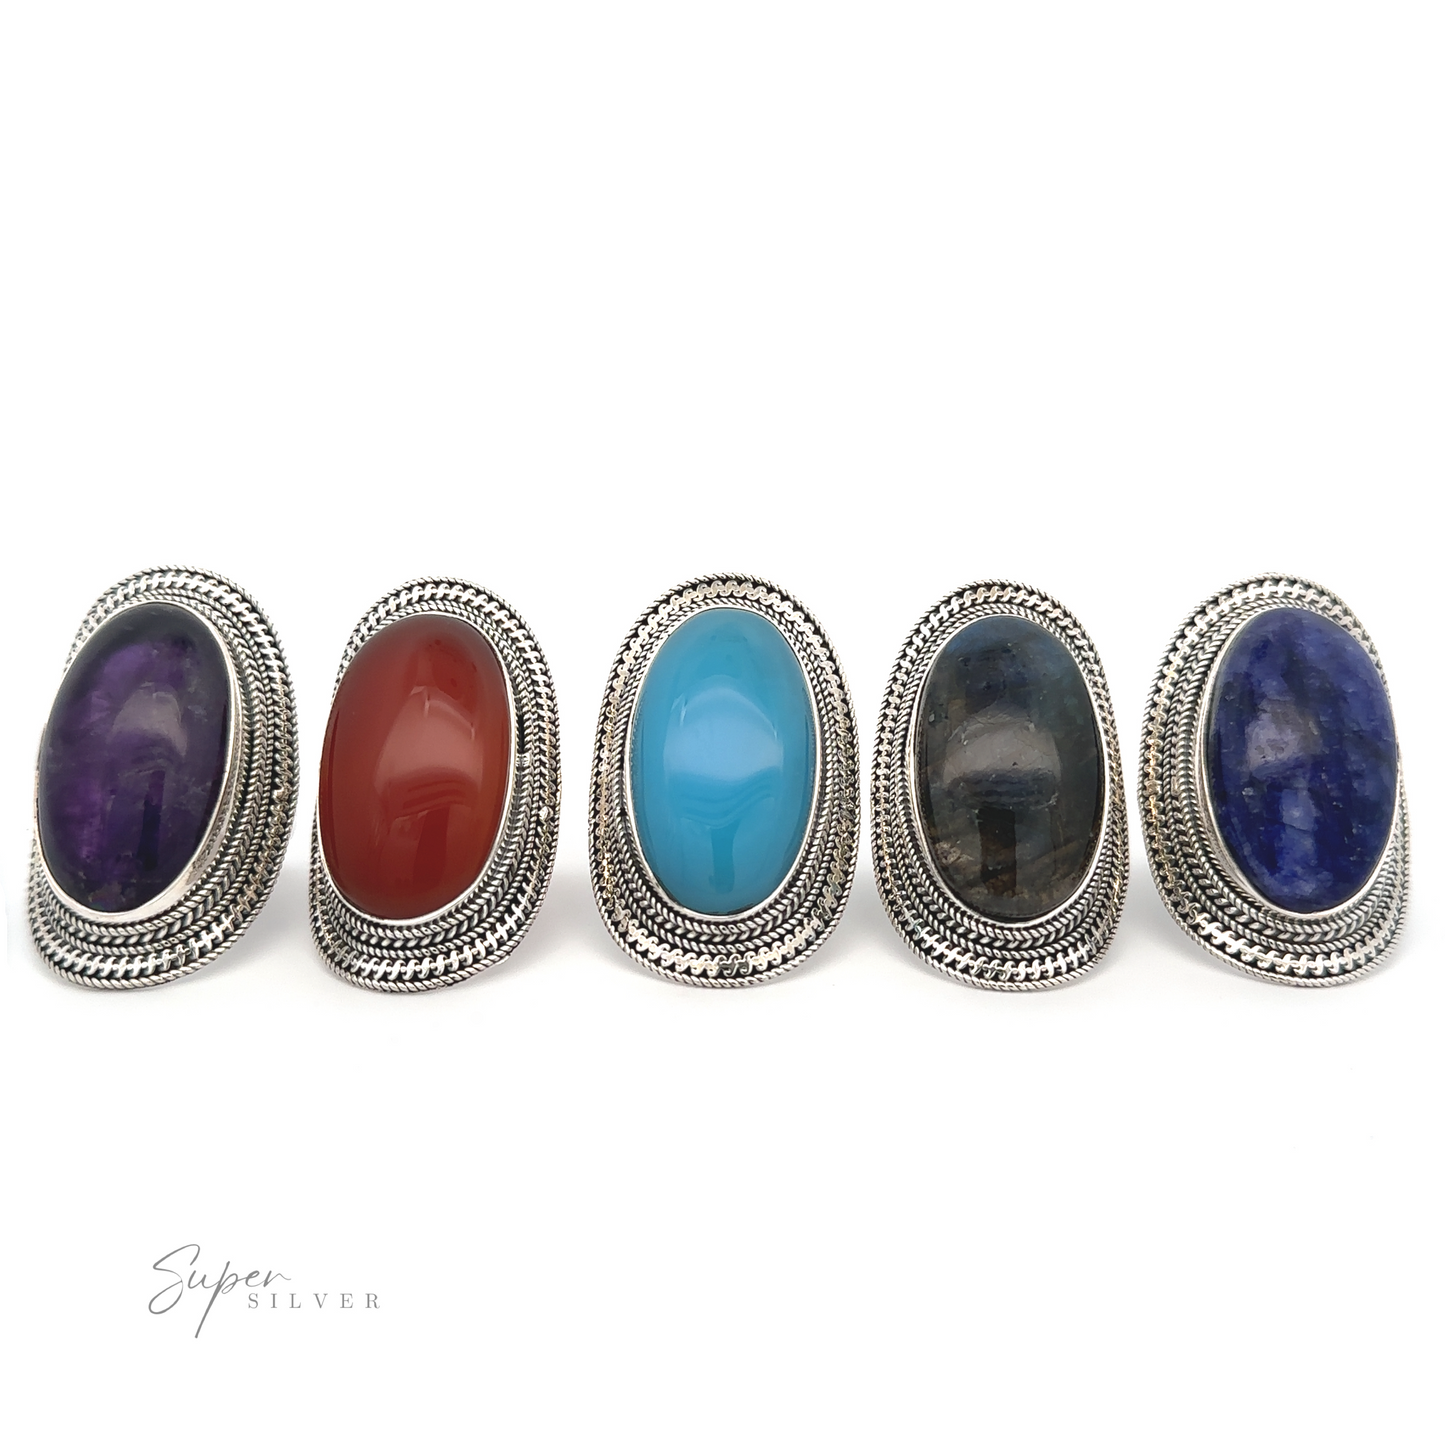 Five Large Oval Shield Gemstone Rings with different colored oval gemstones—purple, red, turquoise, black, and blue—arranged in a row on a white background. Each ring exudes a bohemian flair. "Super Silver" text is visible in the lower-left corner.